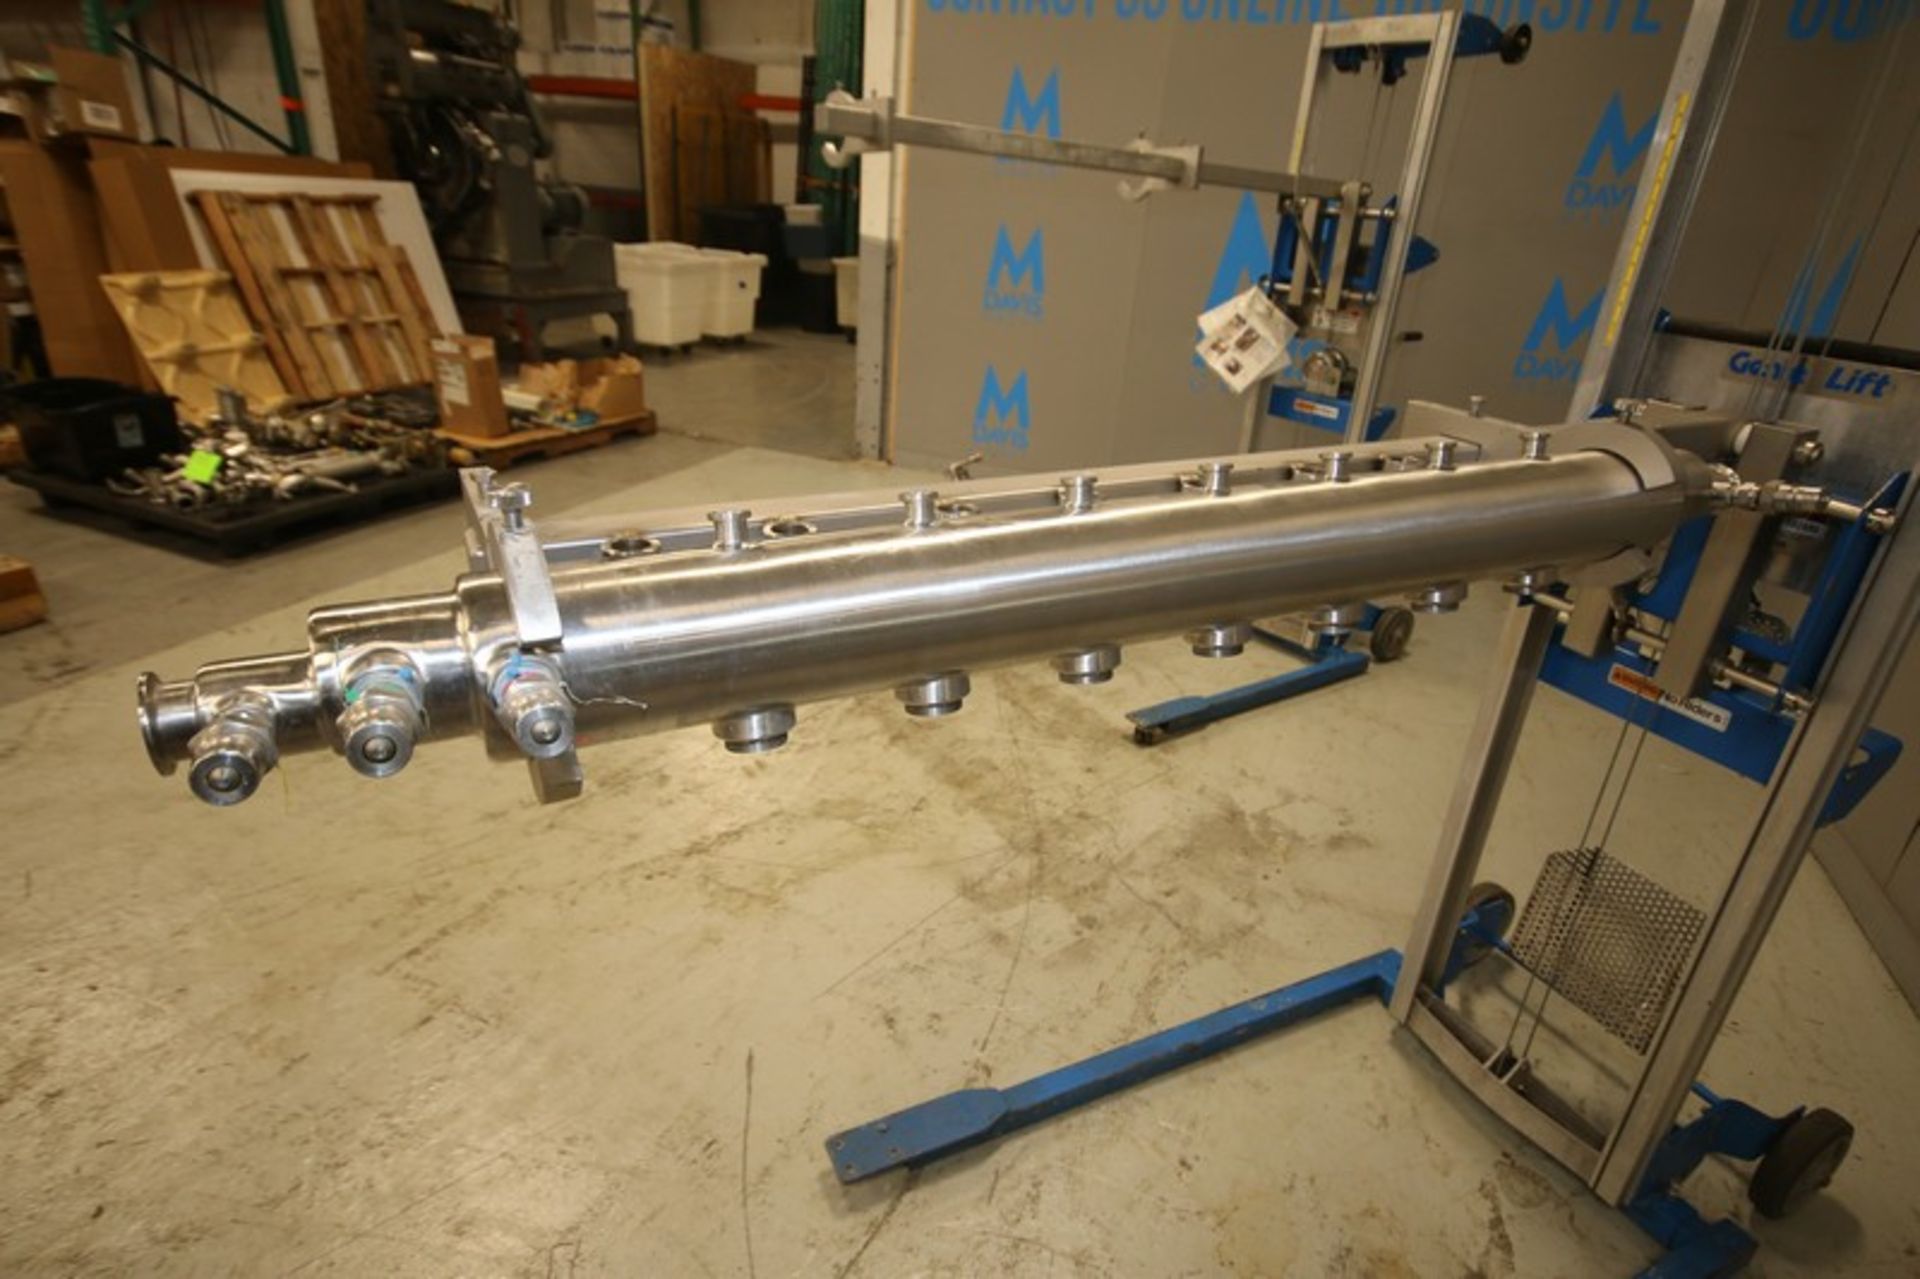 Bakery S/S Spray Manifold System, Includes 50"L x4"W Jacketed S/S Manifold with 1.5" CT Connectors & - Image 3 of 3